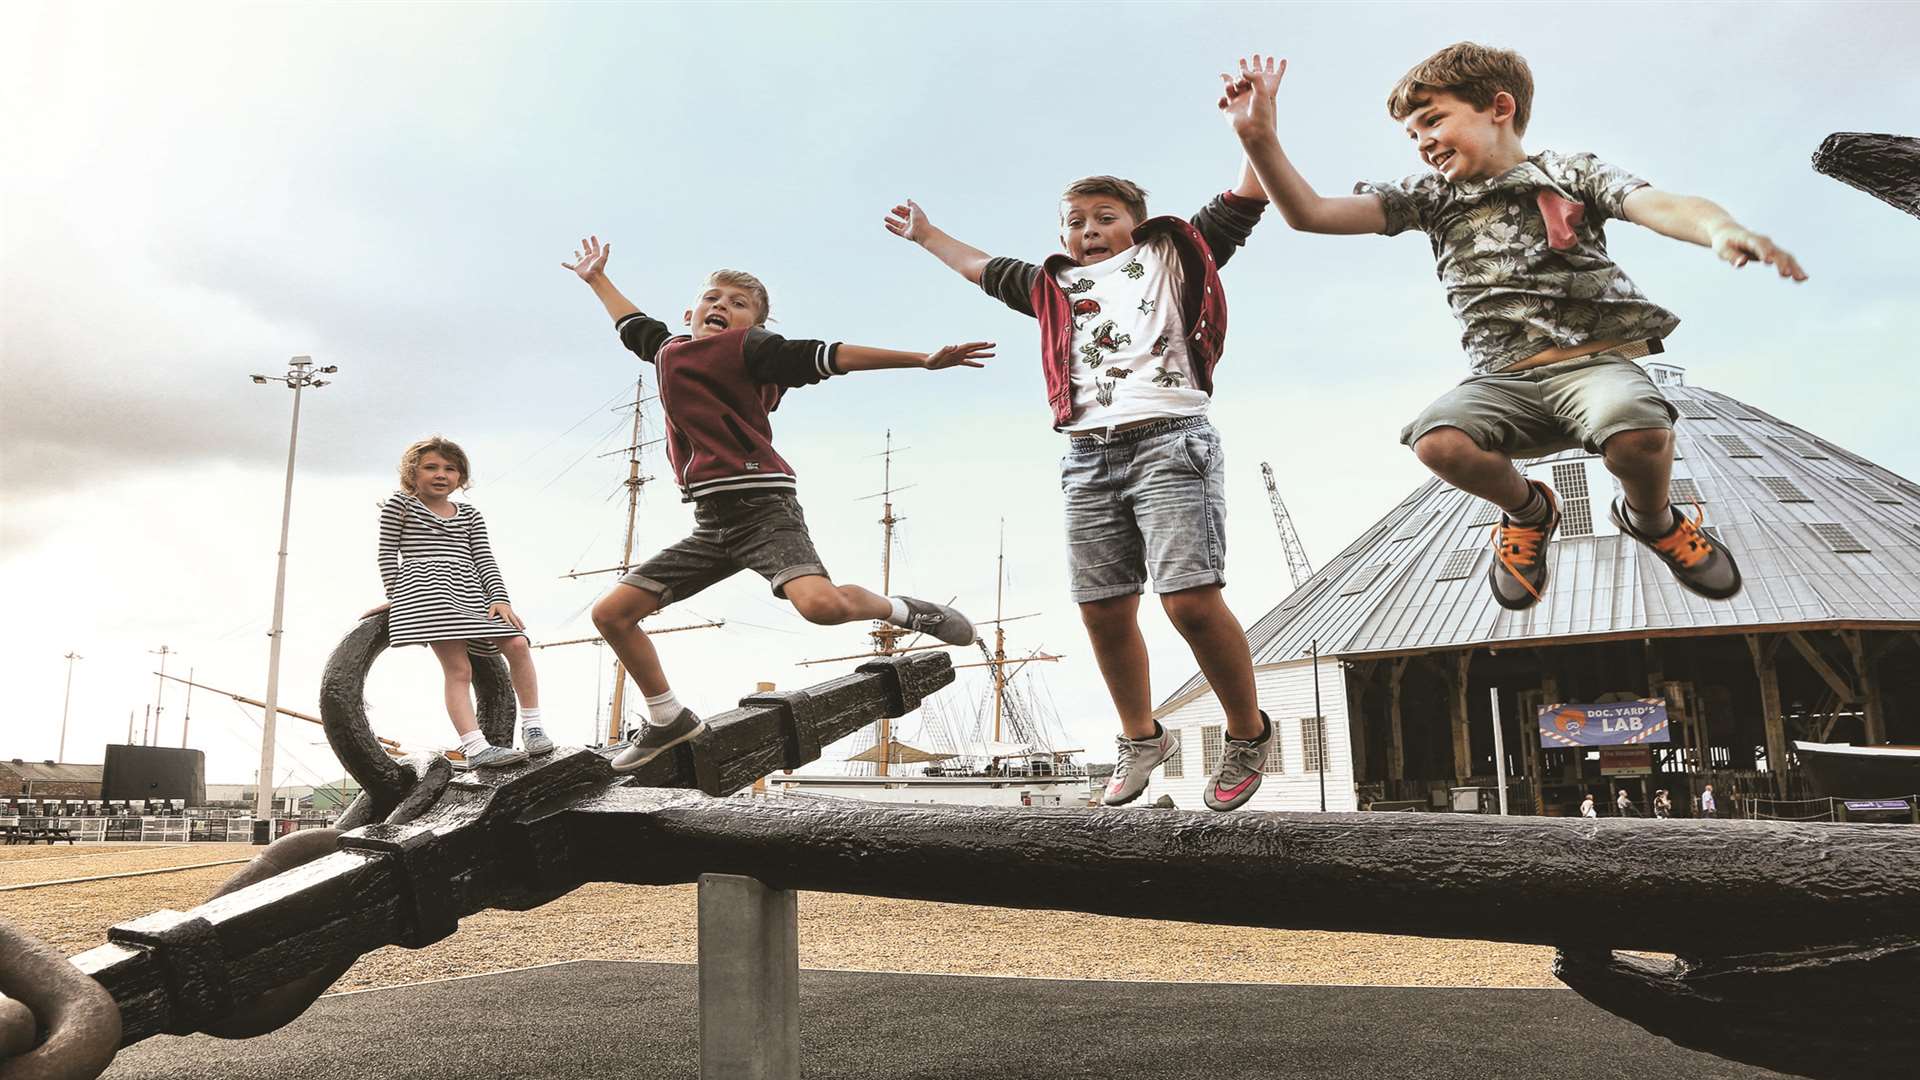 There's plenty of school holiday fun to be had at Chatham Historic Dockyard